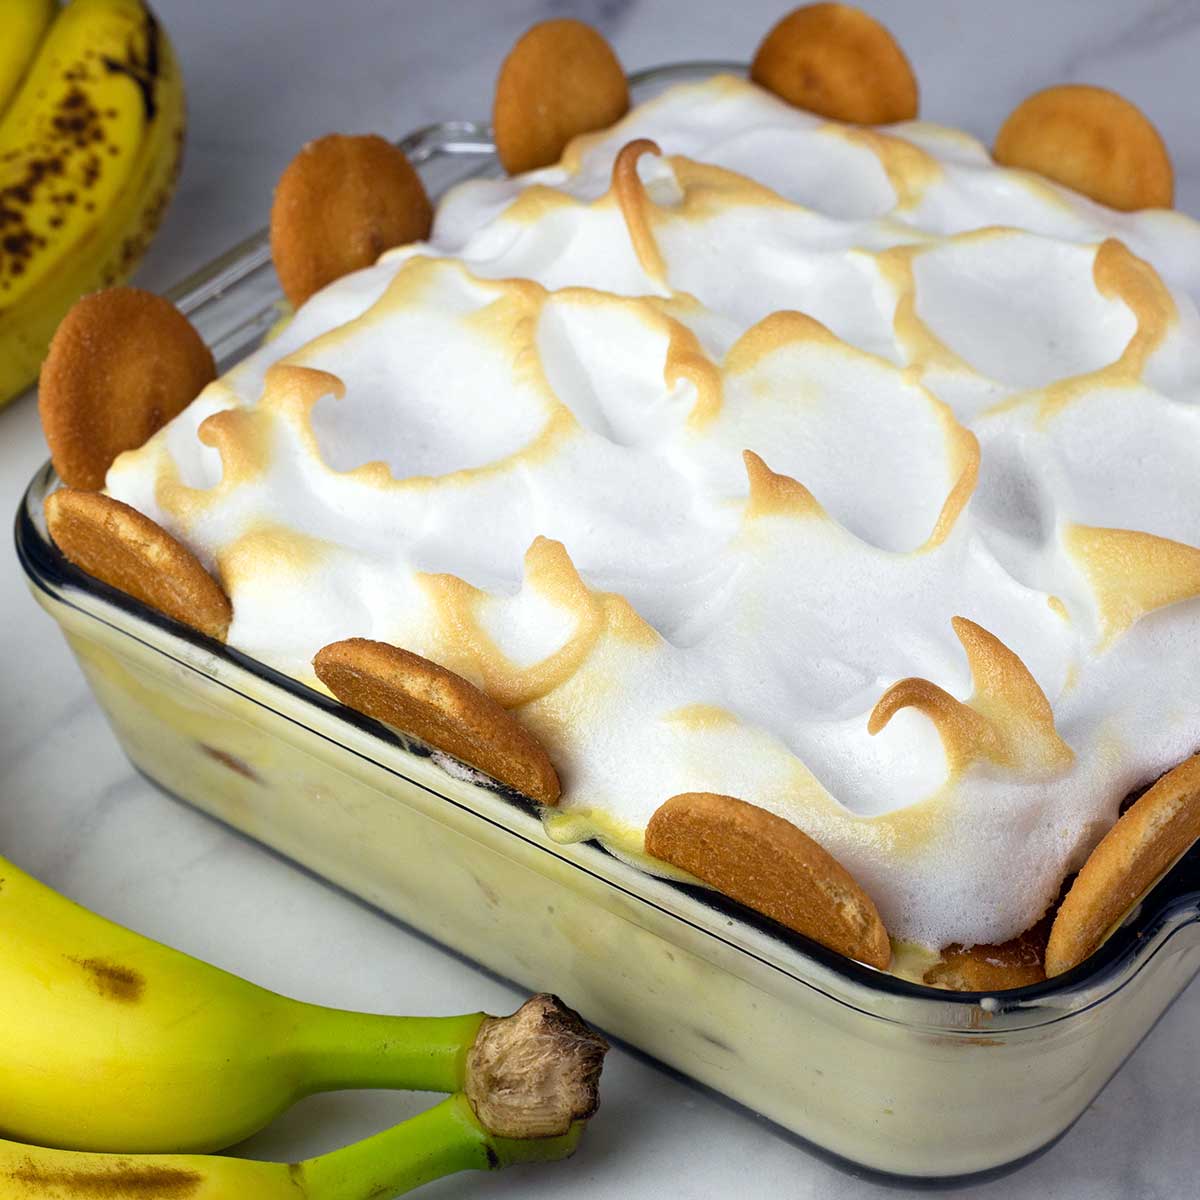 banana pudding with meringue topping in a glass square dish with cookies on the edge next to bananas